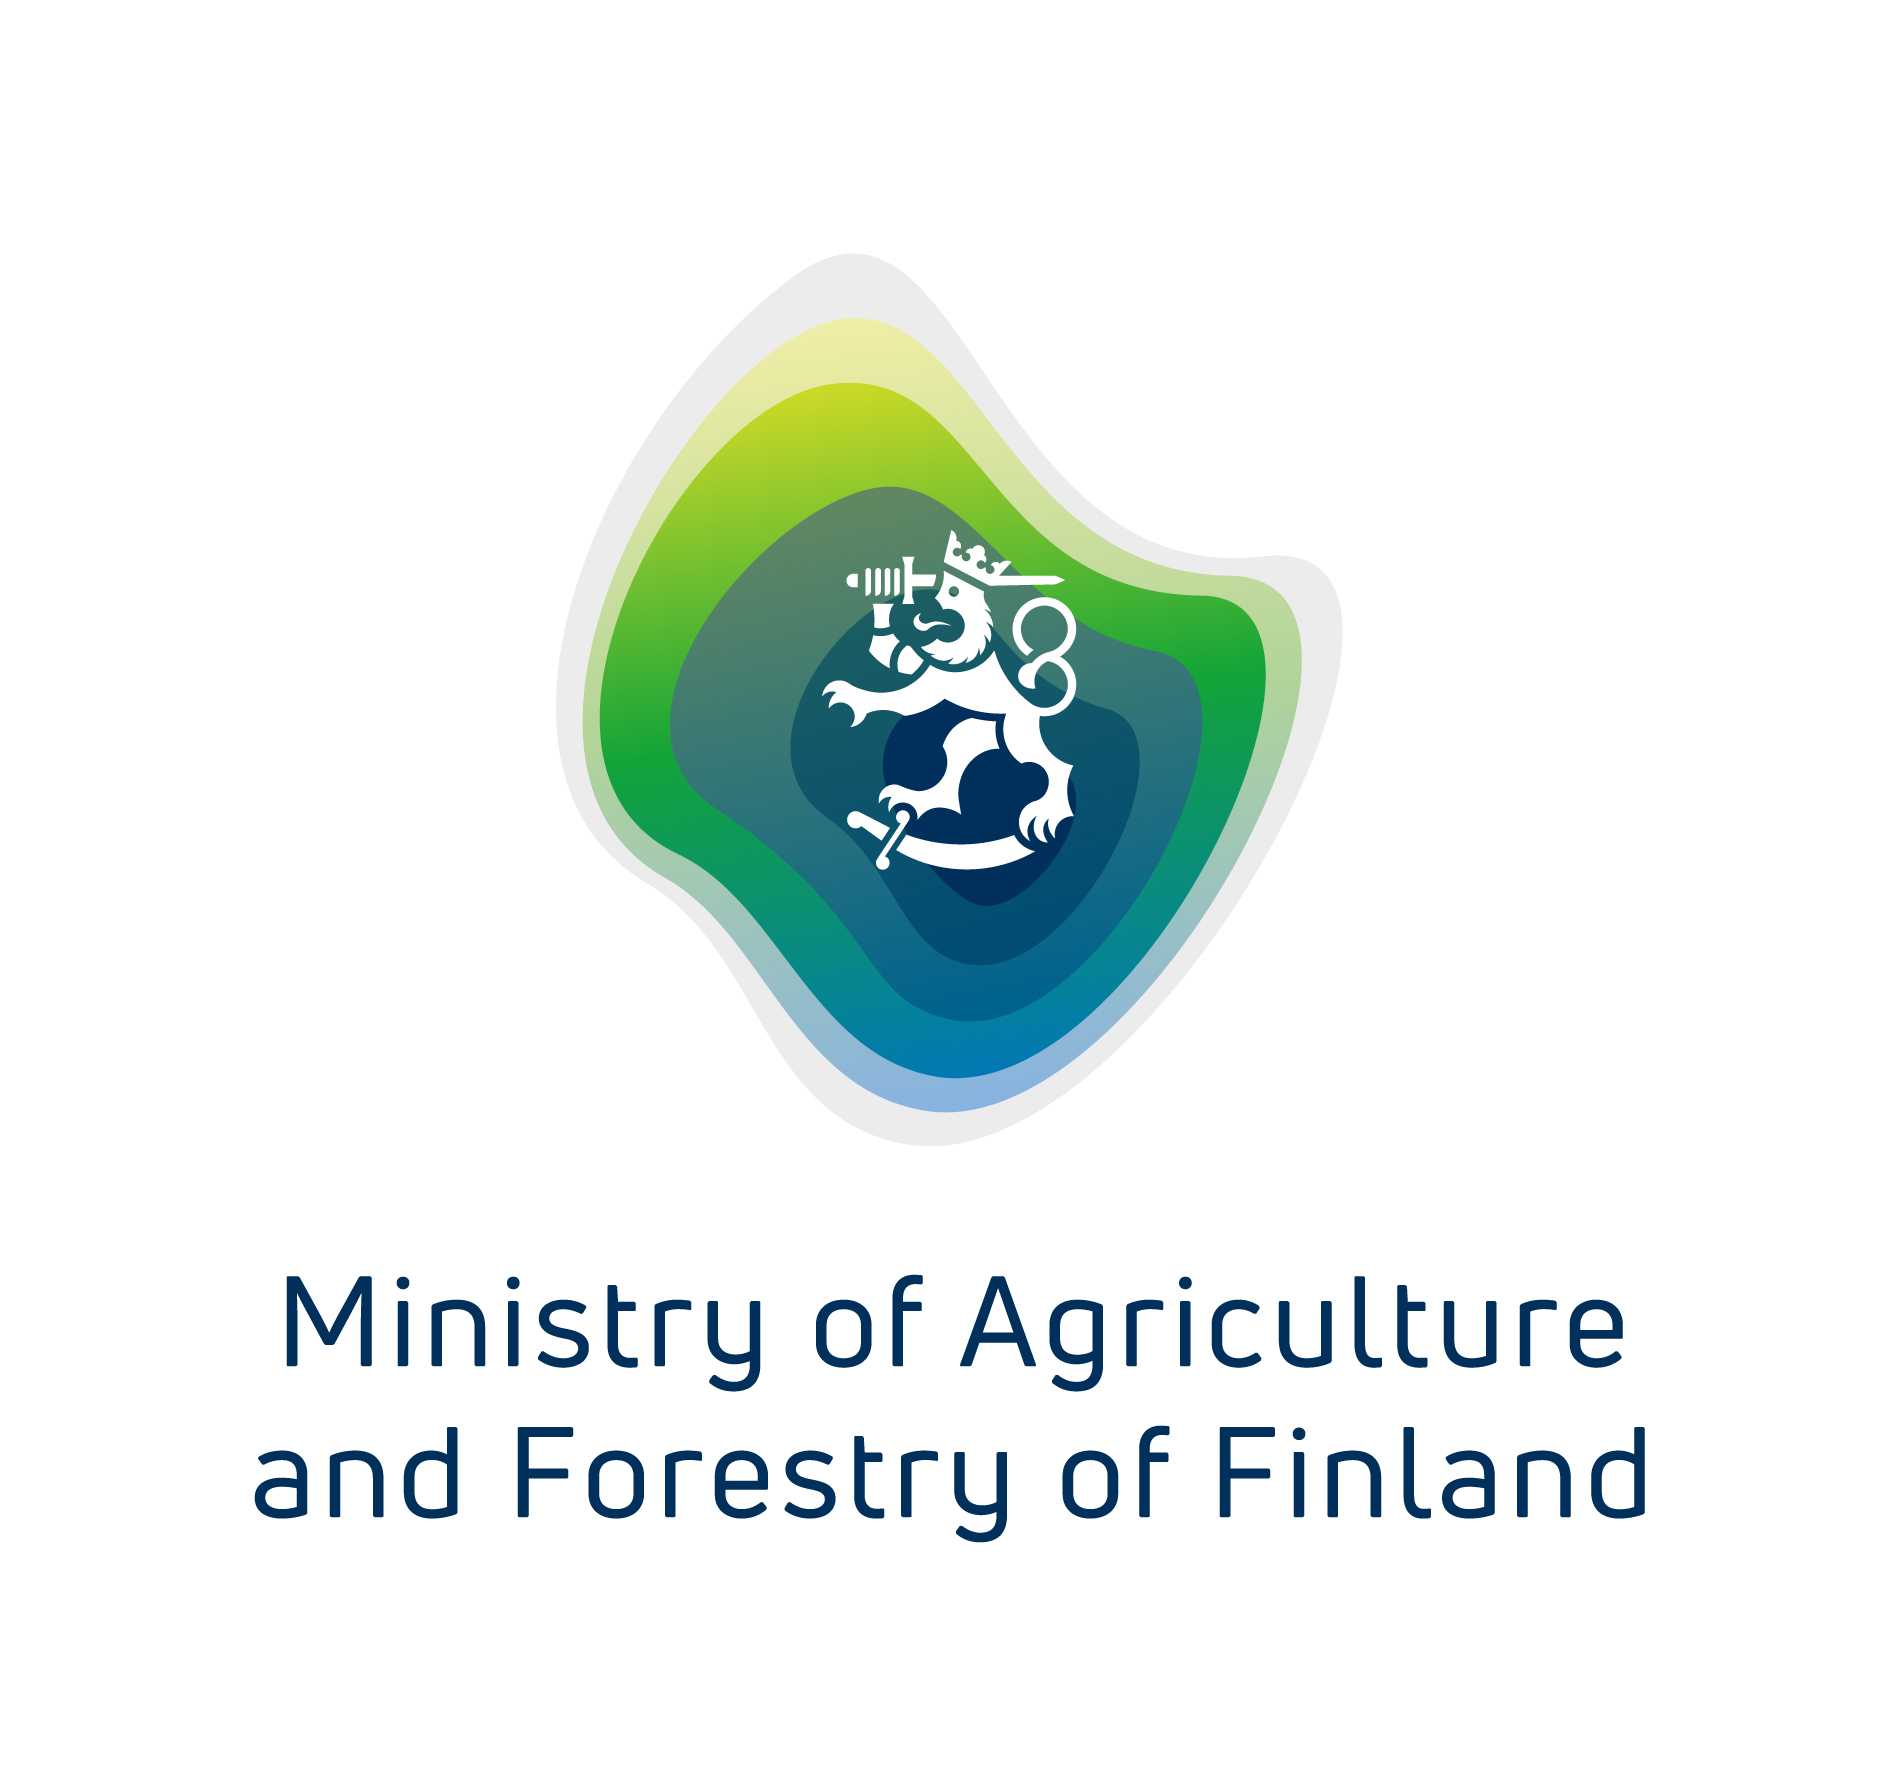 Ministry of Agriculture and Forestry of Finland